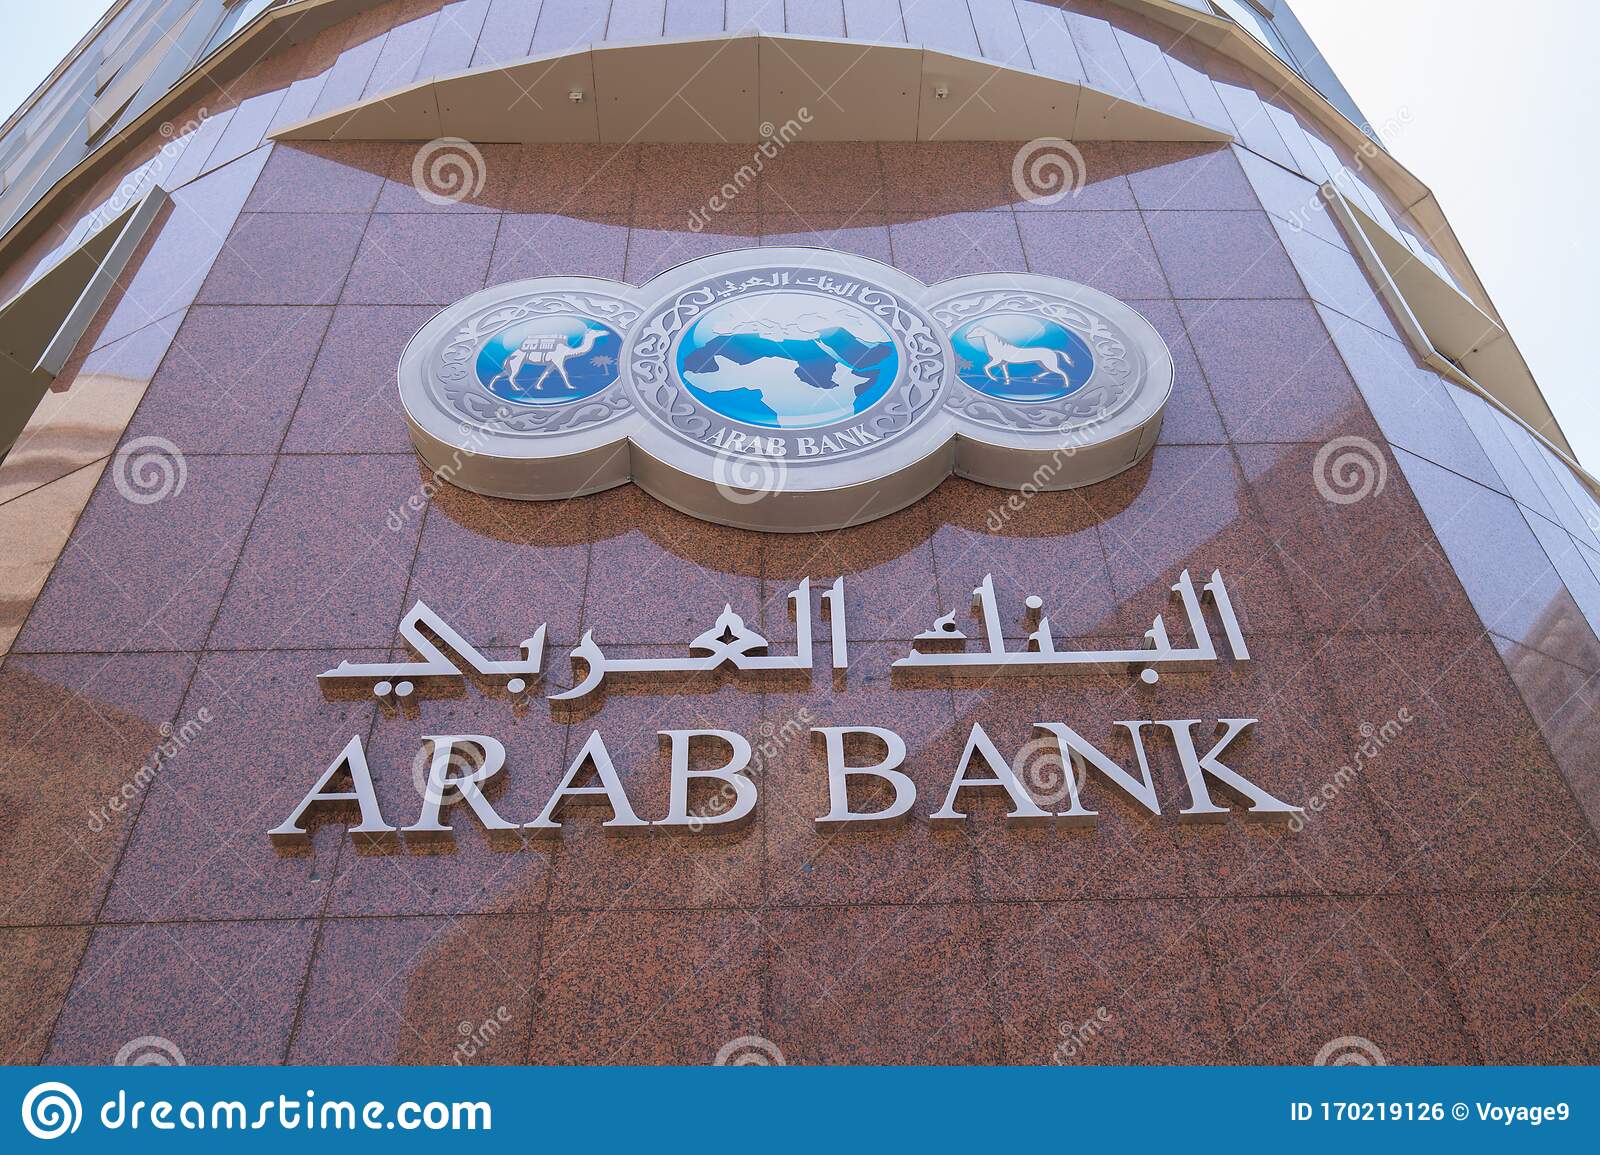 Egyptian Fintechs Can Benefit from Arab Bank’s AB Accelerator Funding Program